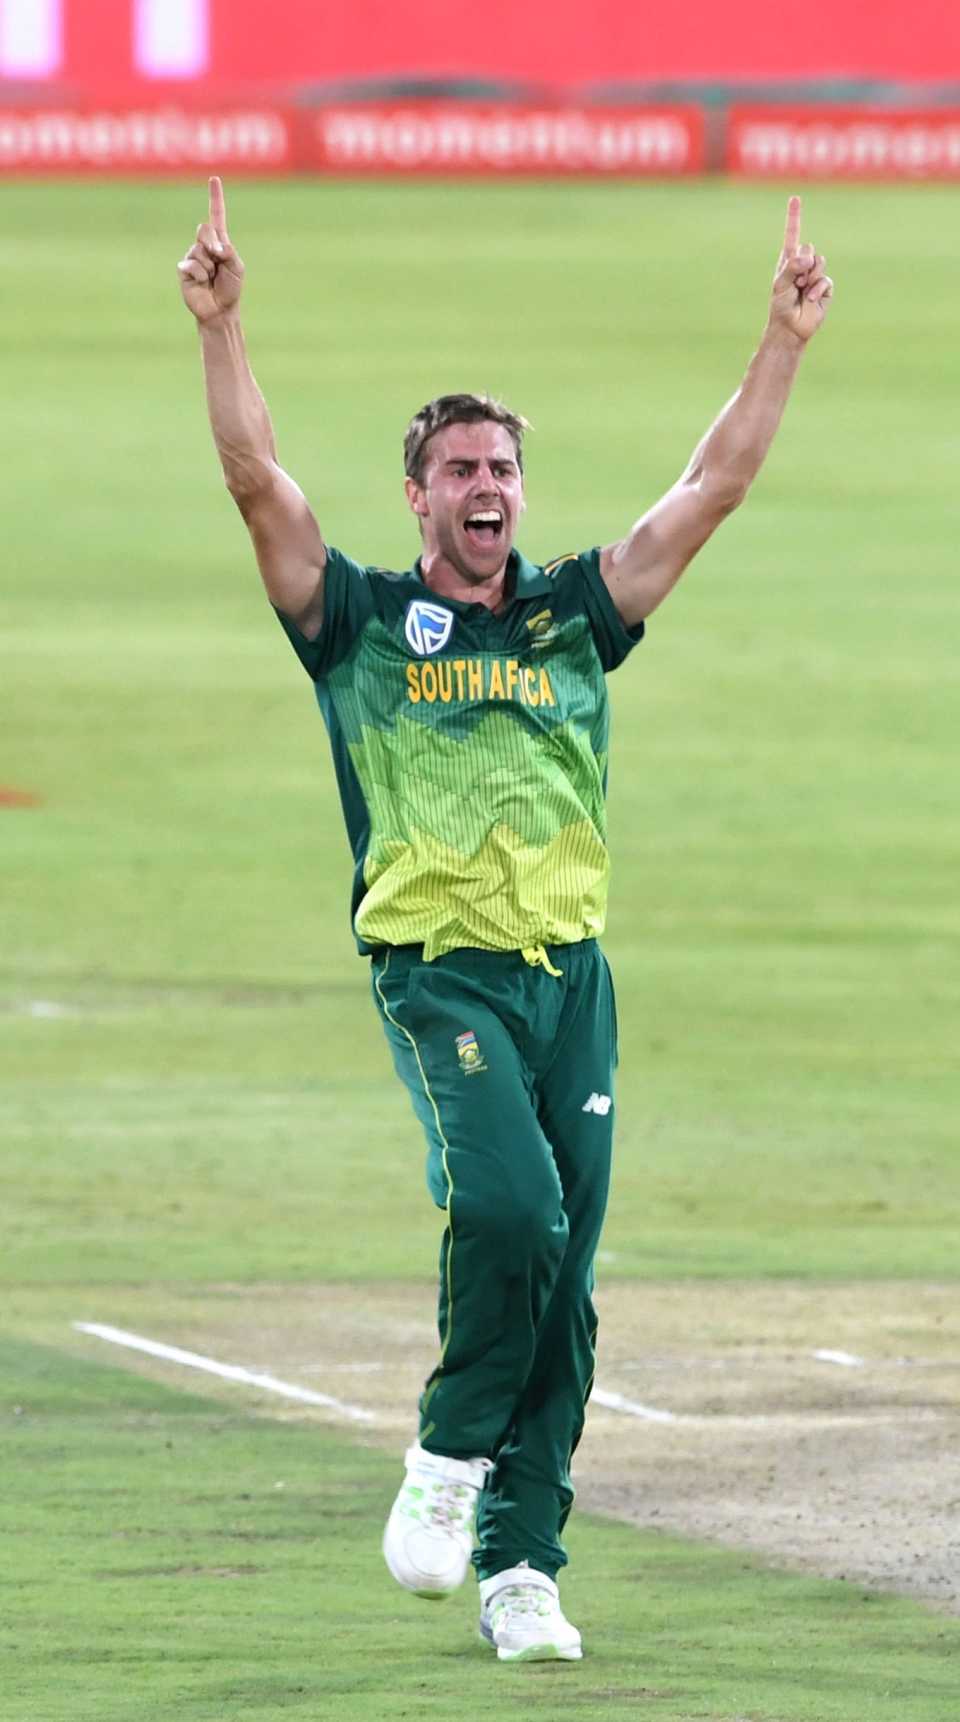 Anrich Nortje has shown that he is a wicket-taking option even when conditions don't suit him